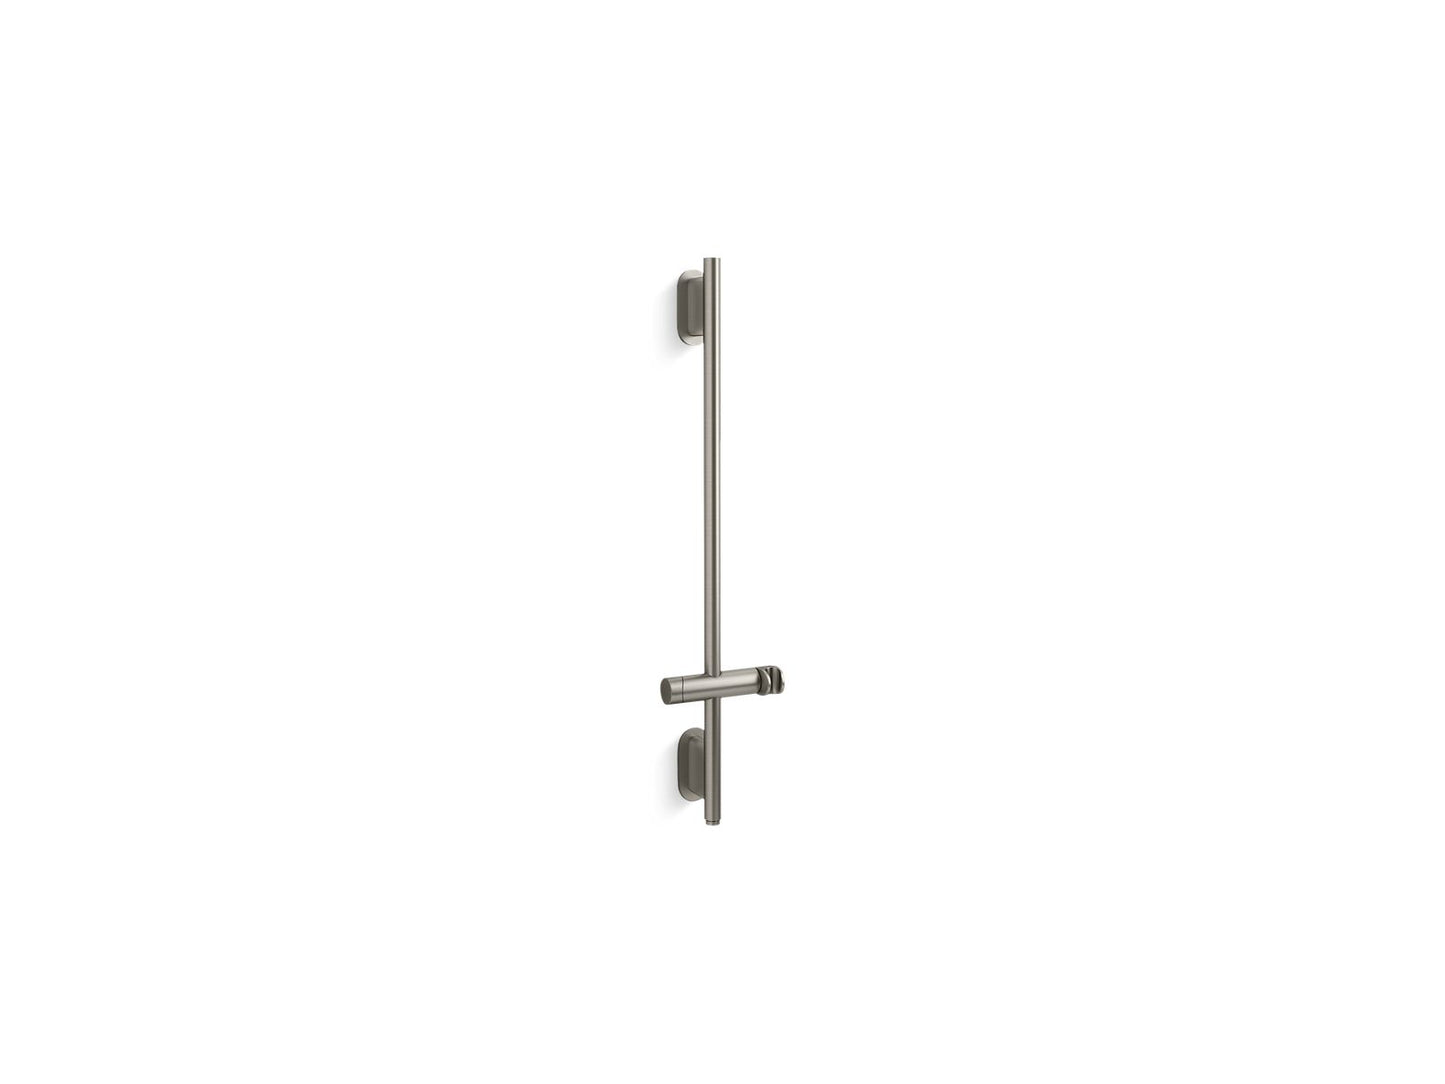 KOHLER K-26314-BN Statement 31-1/2" Deluxe Slidebar With Integrated Water Supply In Vibrant Brushed Nickel